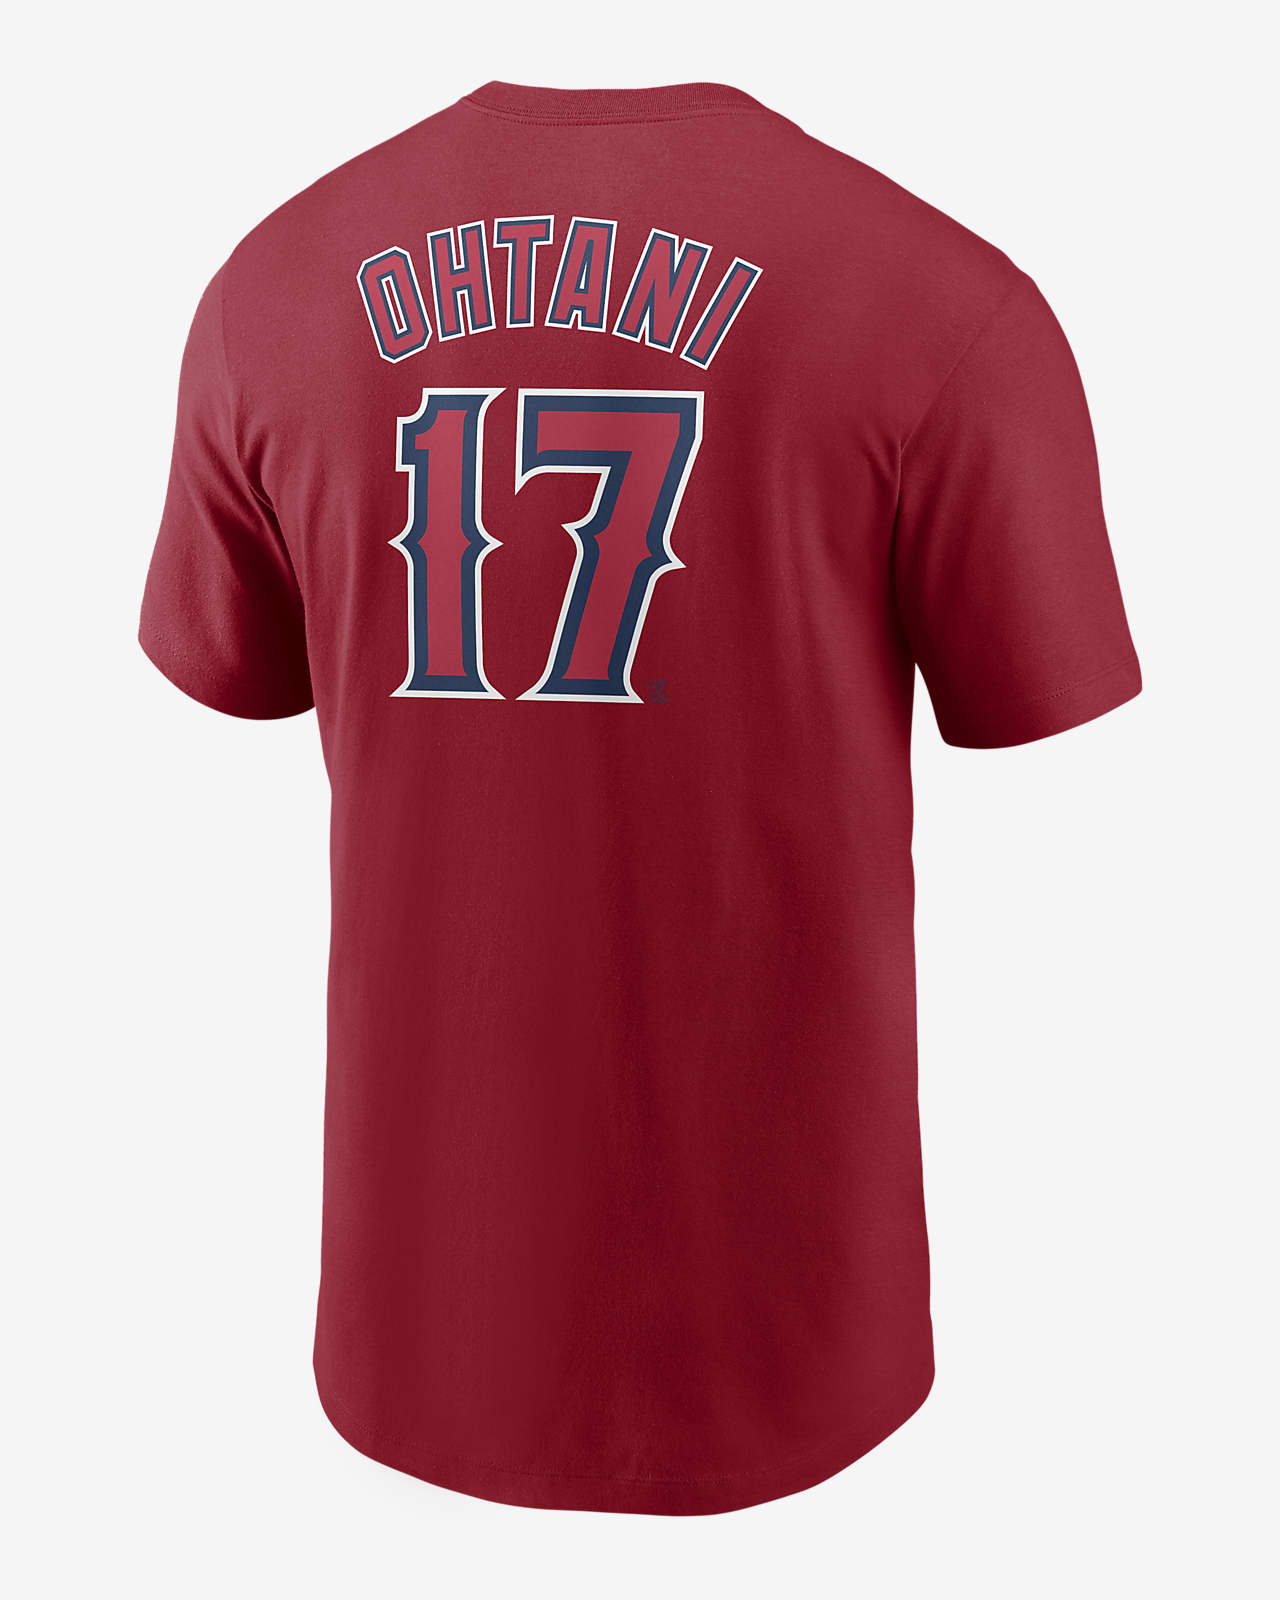 los angeles angels jersey ohtani